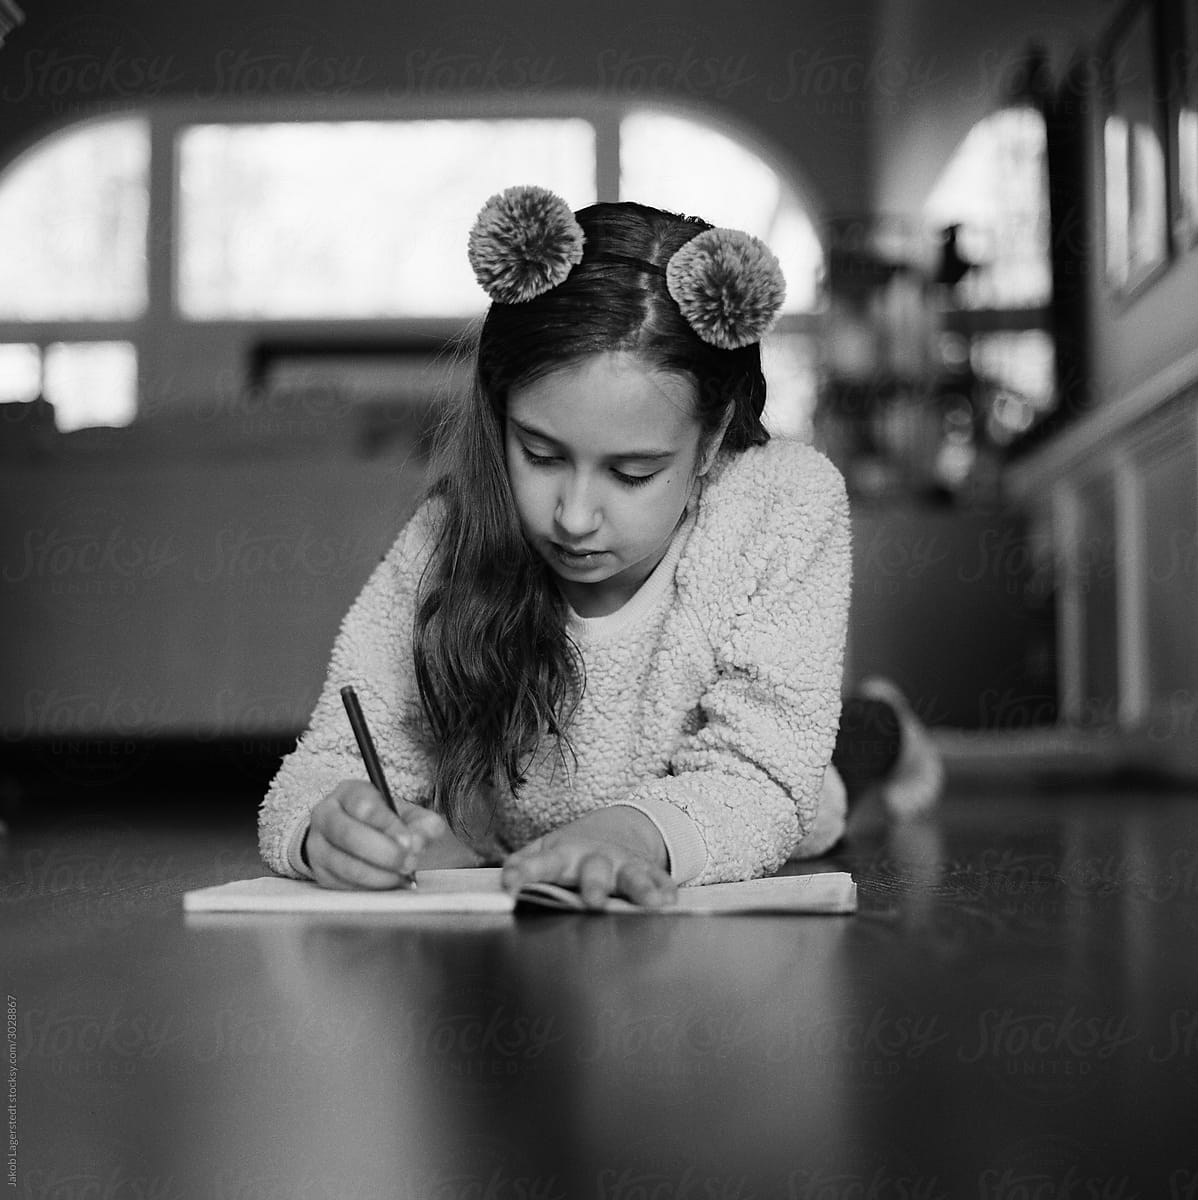 Young girl laying on a hardwood floor writing in a journal